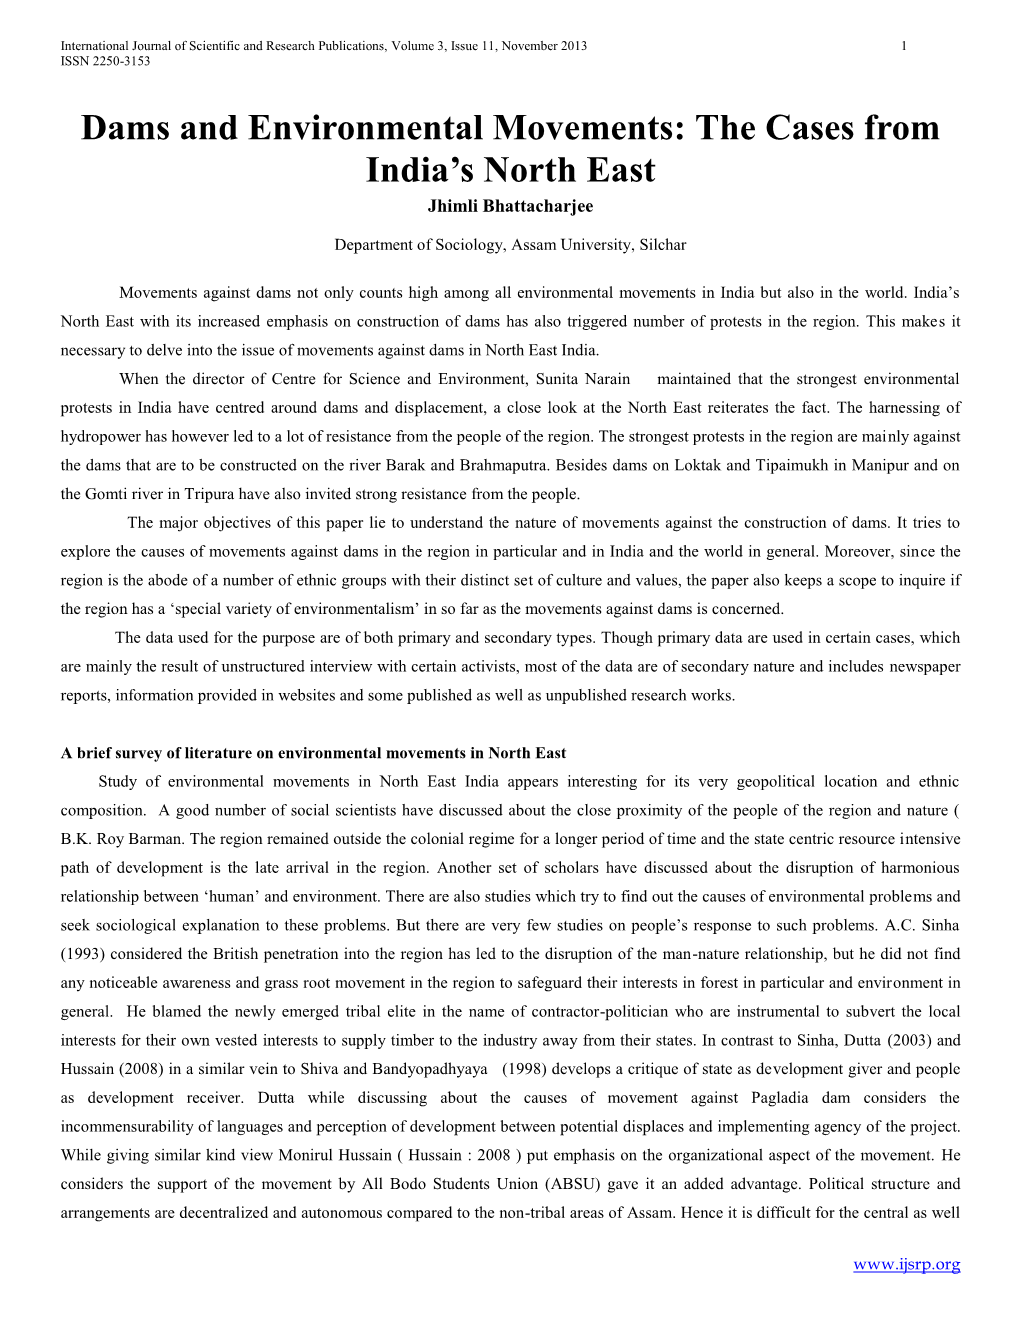 Dams and Environmental Movements: the Cases from India’S North East Jhimli Bhattacharjee